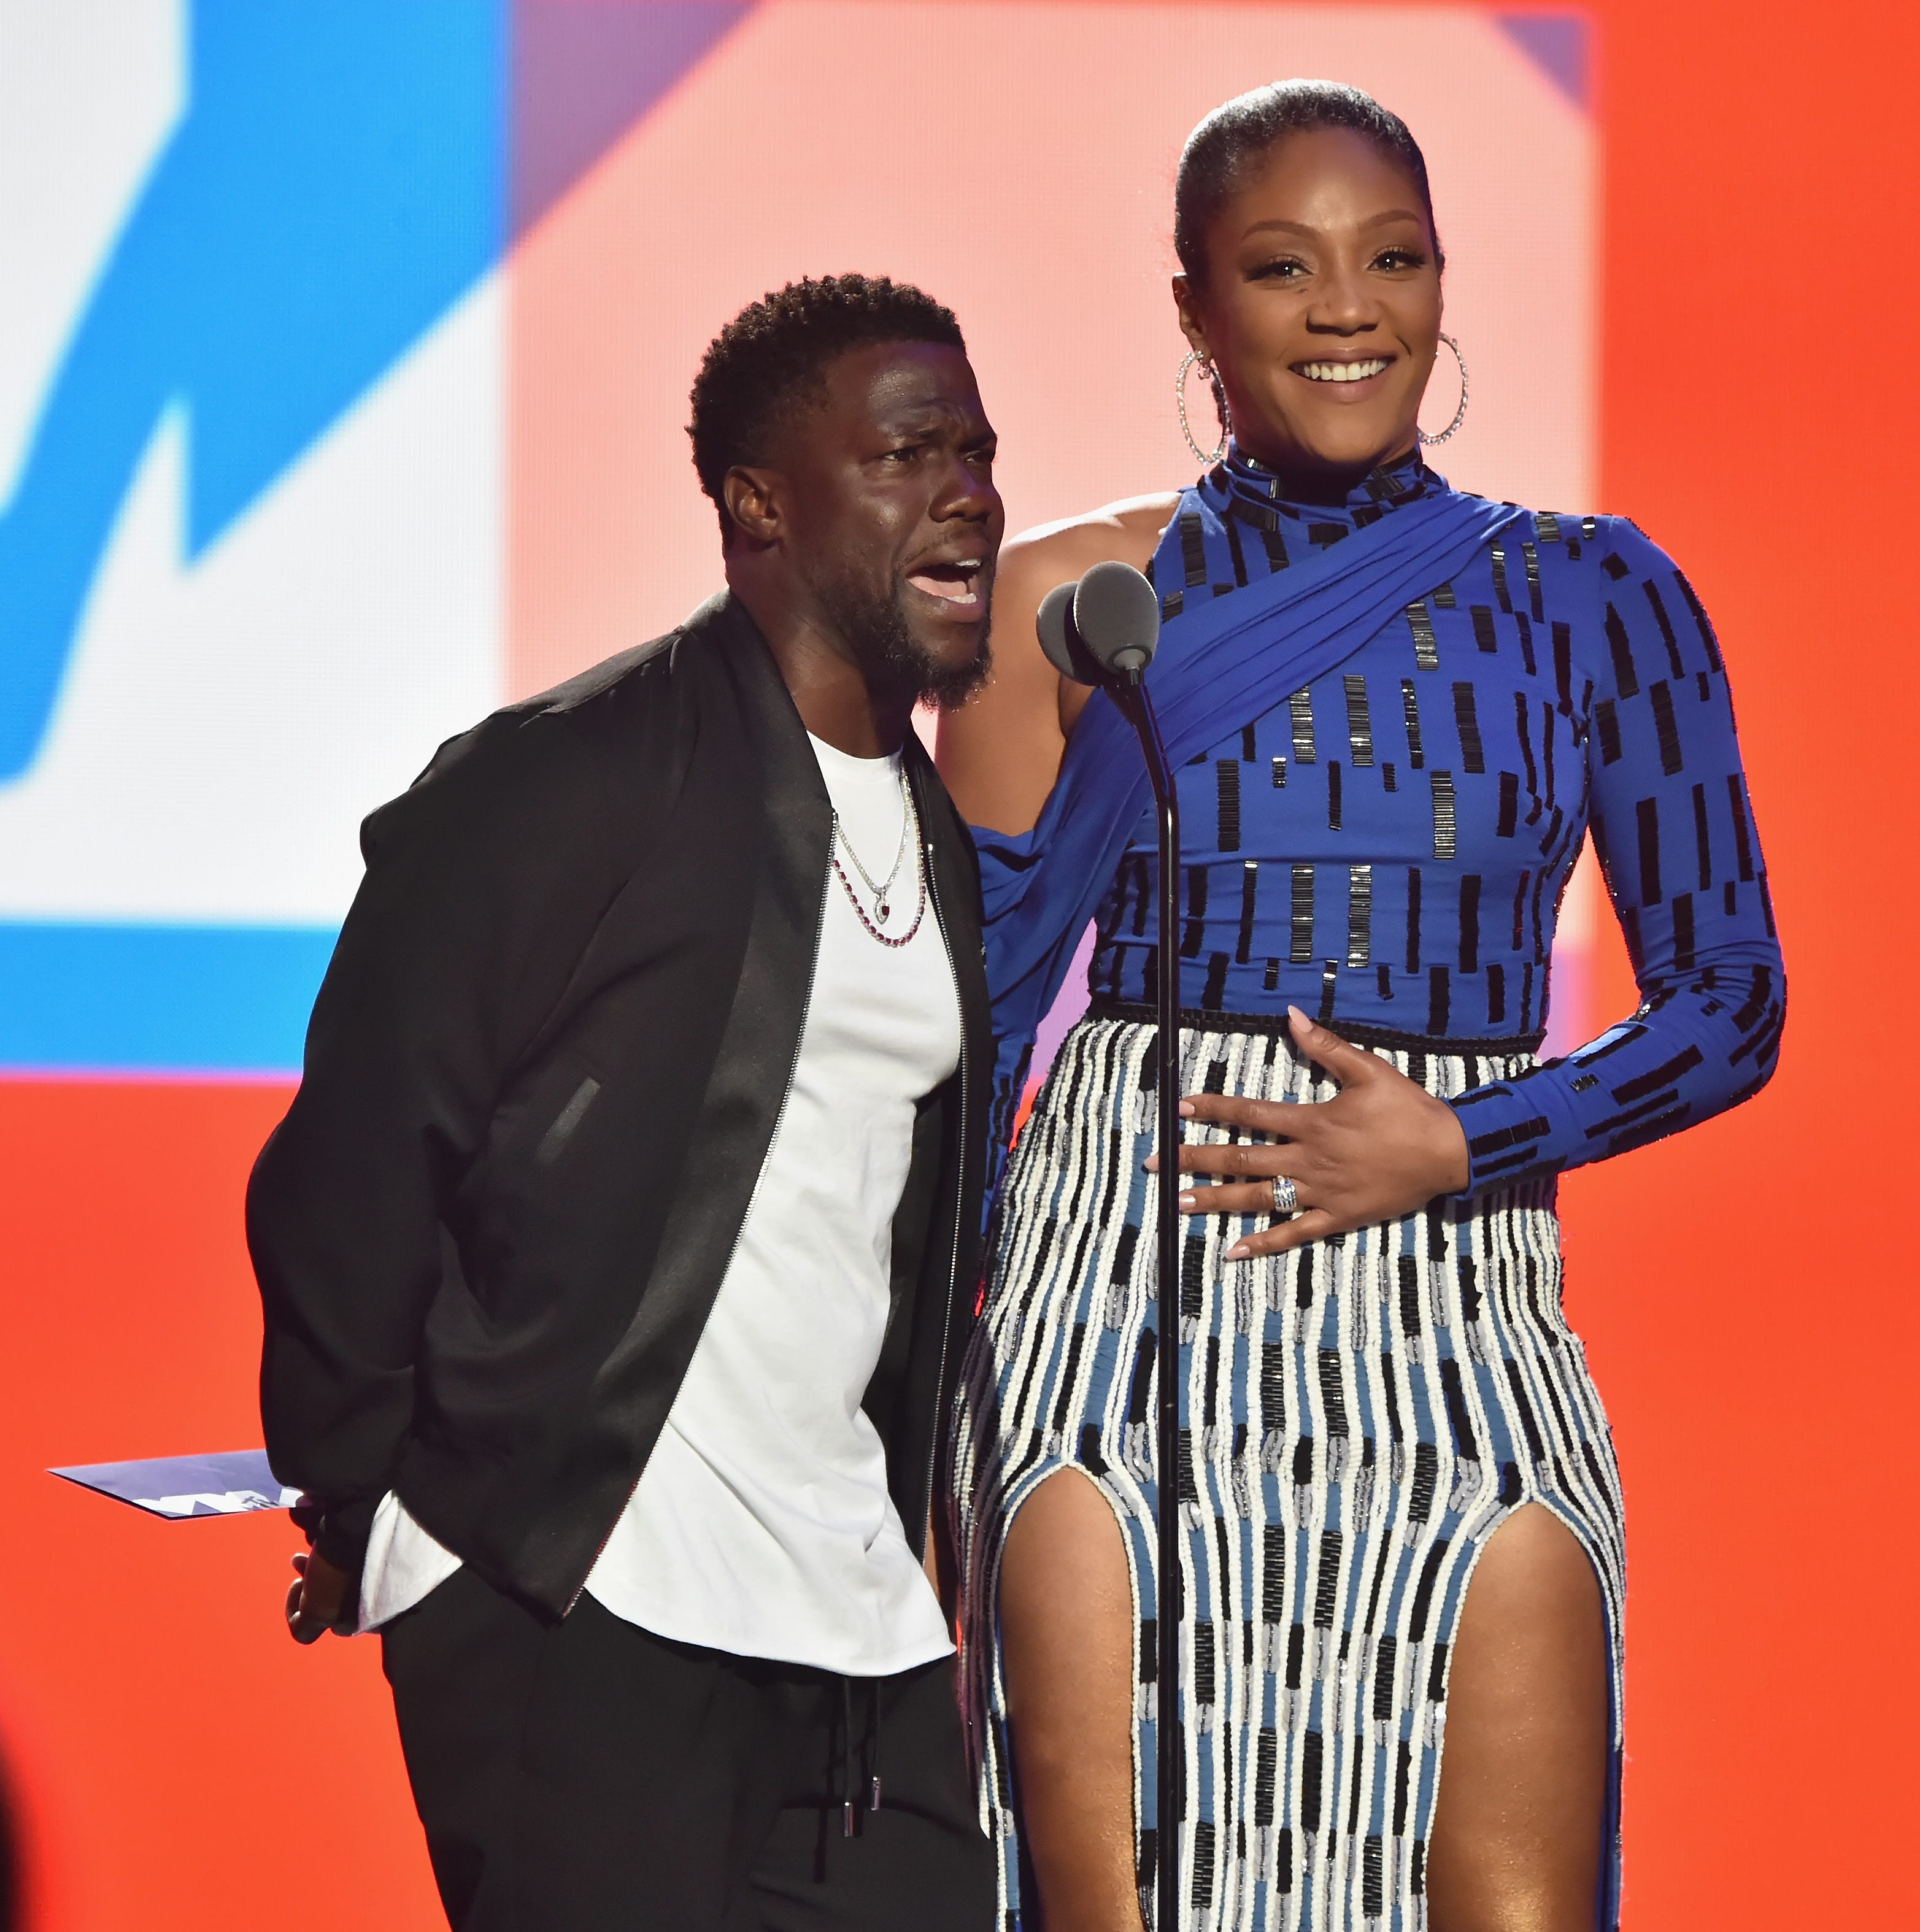 Kevin Hart and Tiffany Haddish speak onstage during the 2018 MTV Video Music Awards at Radio City Music Hall on August 20, 2018 in New York City.